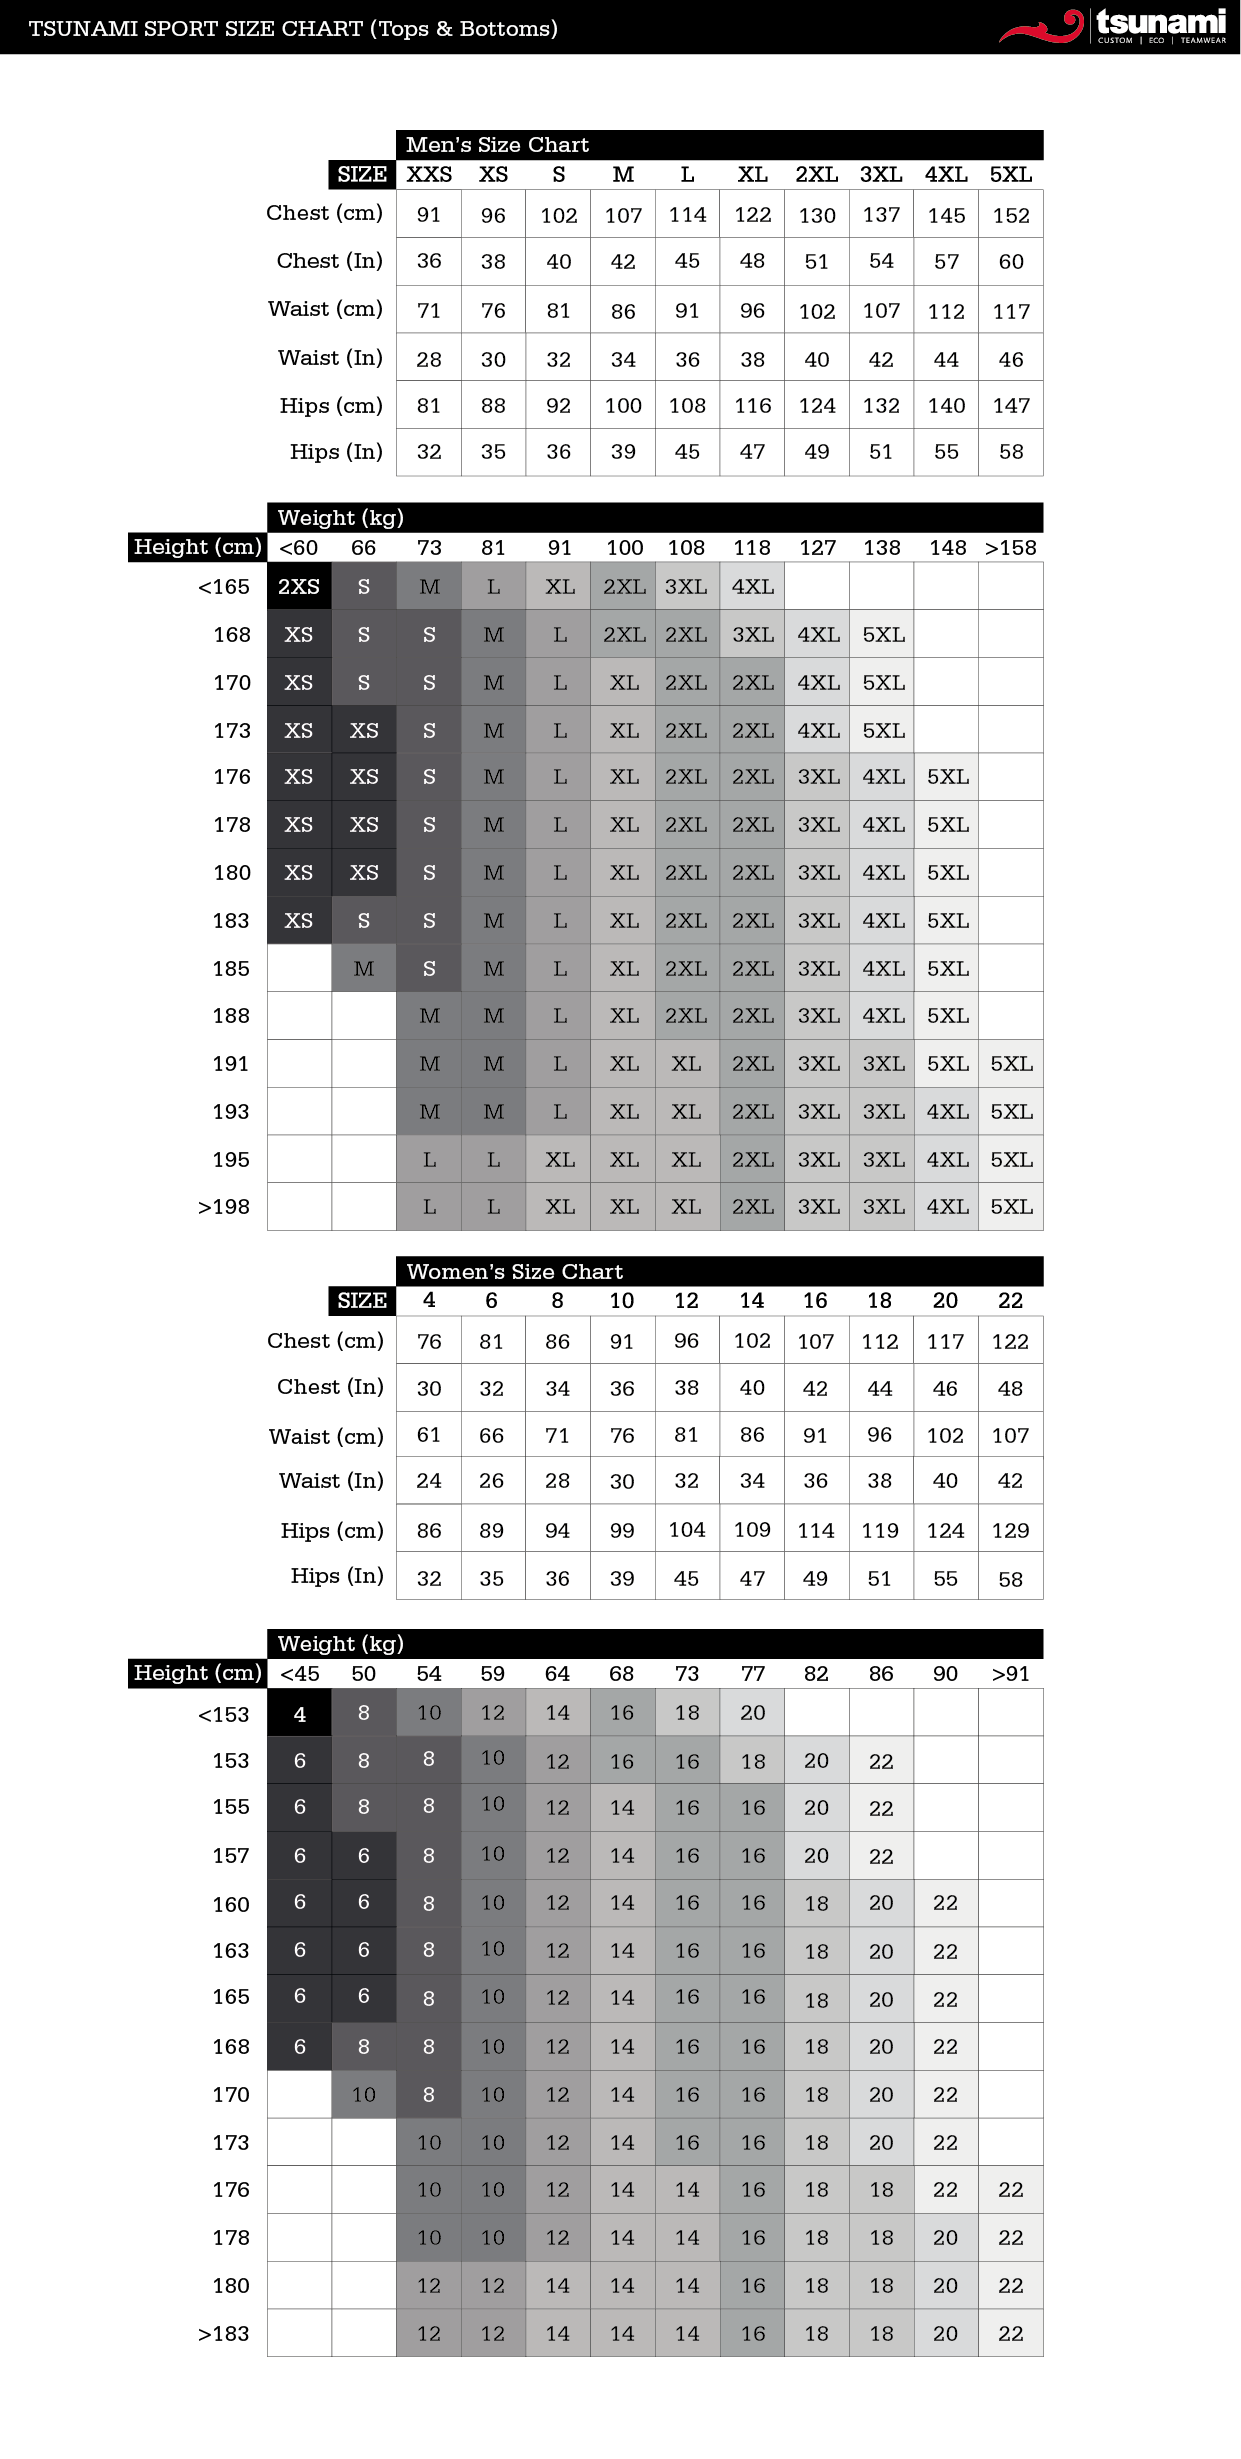 Sizing Guide/Chart